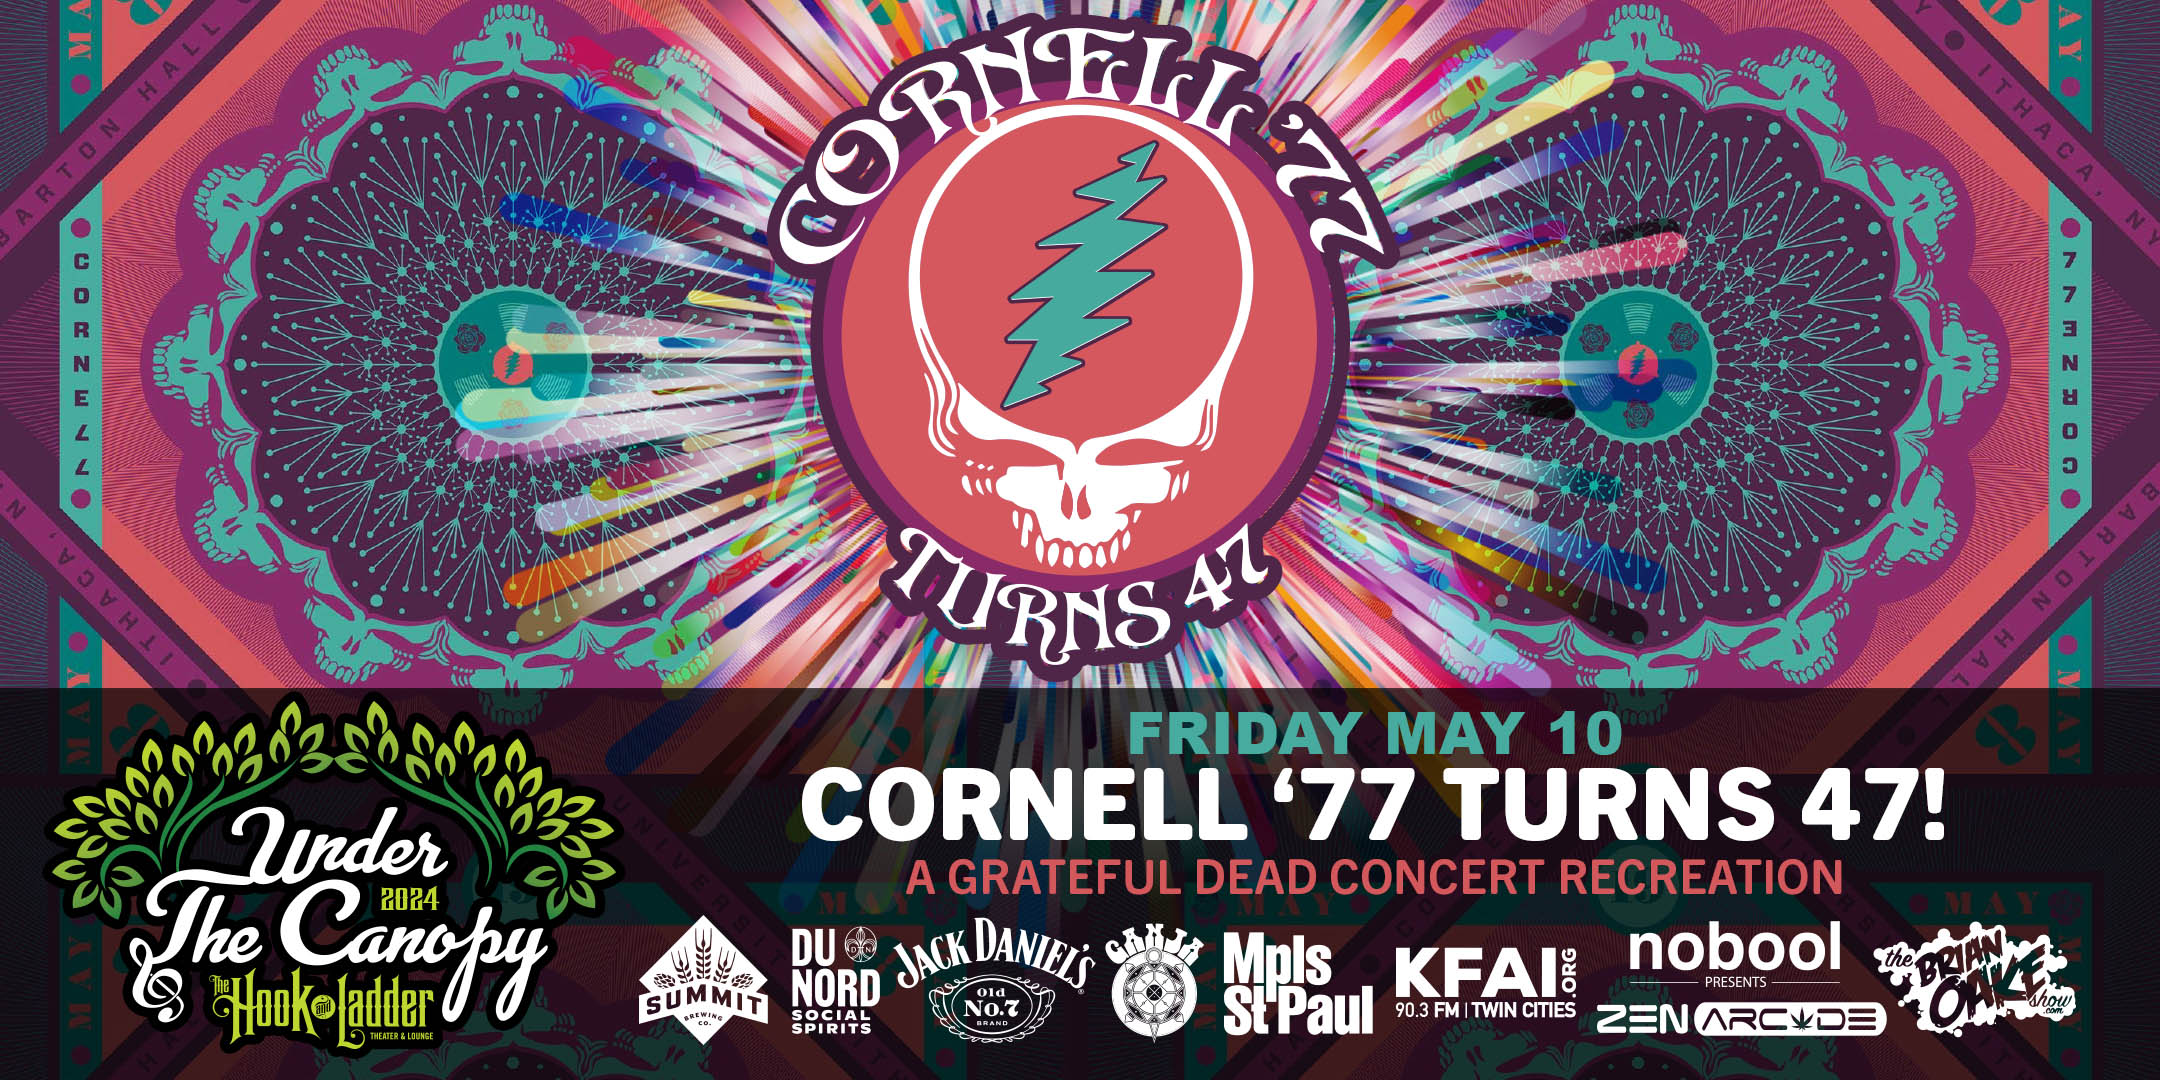 Cornell '77 Turns 47 ~ A Grateful Dead Concert Recreation! ~ Saturday, May 10 Under The Canopy at The Hook and Ladder Theater "An Urban Outdoor Summer Concert Series" Doors 6:00pm :: Music 7:00pm :: 21+ Reserved Seats: $40 GA: $20 ADV / $26 DOS